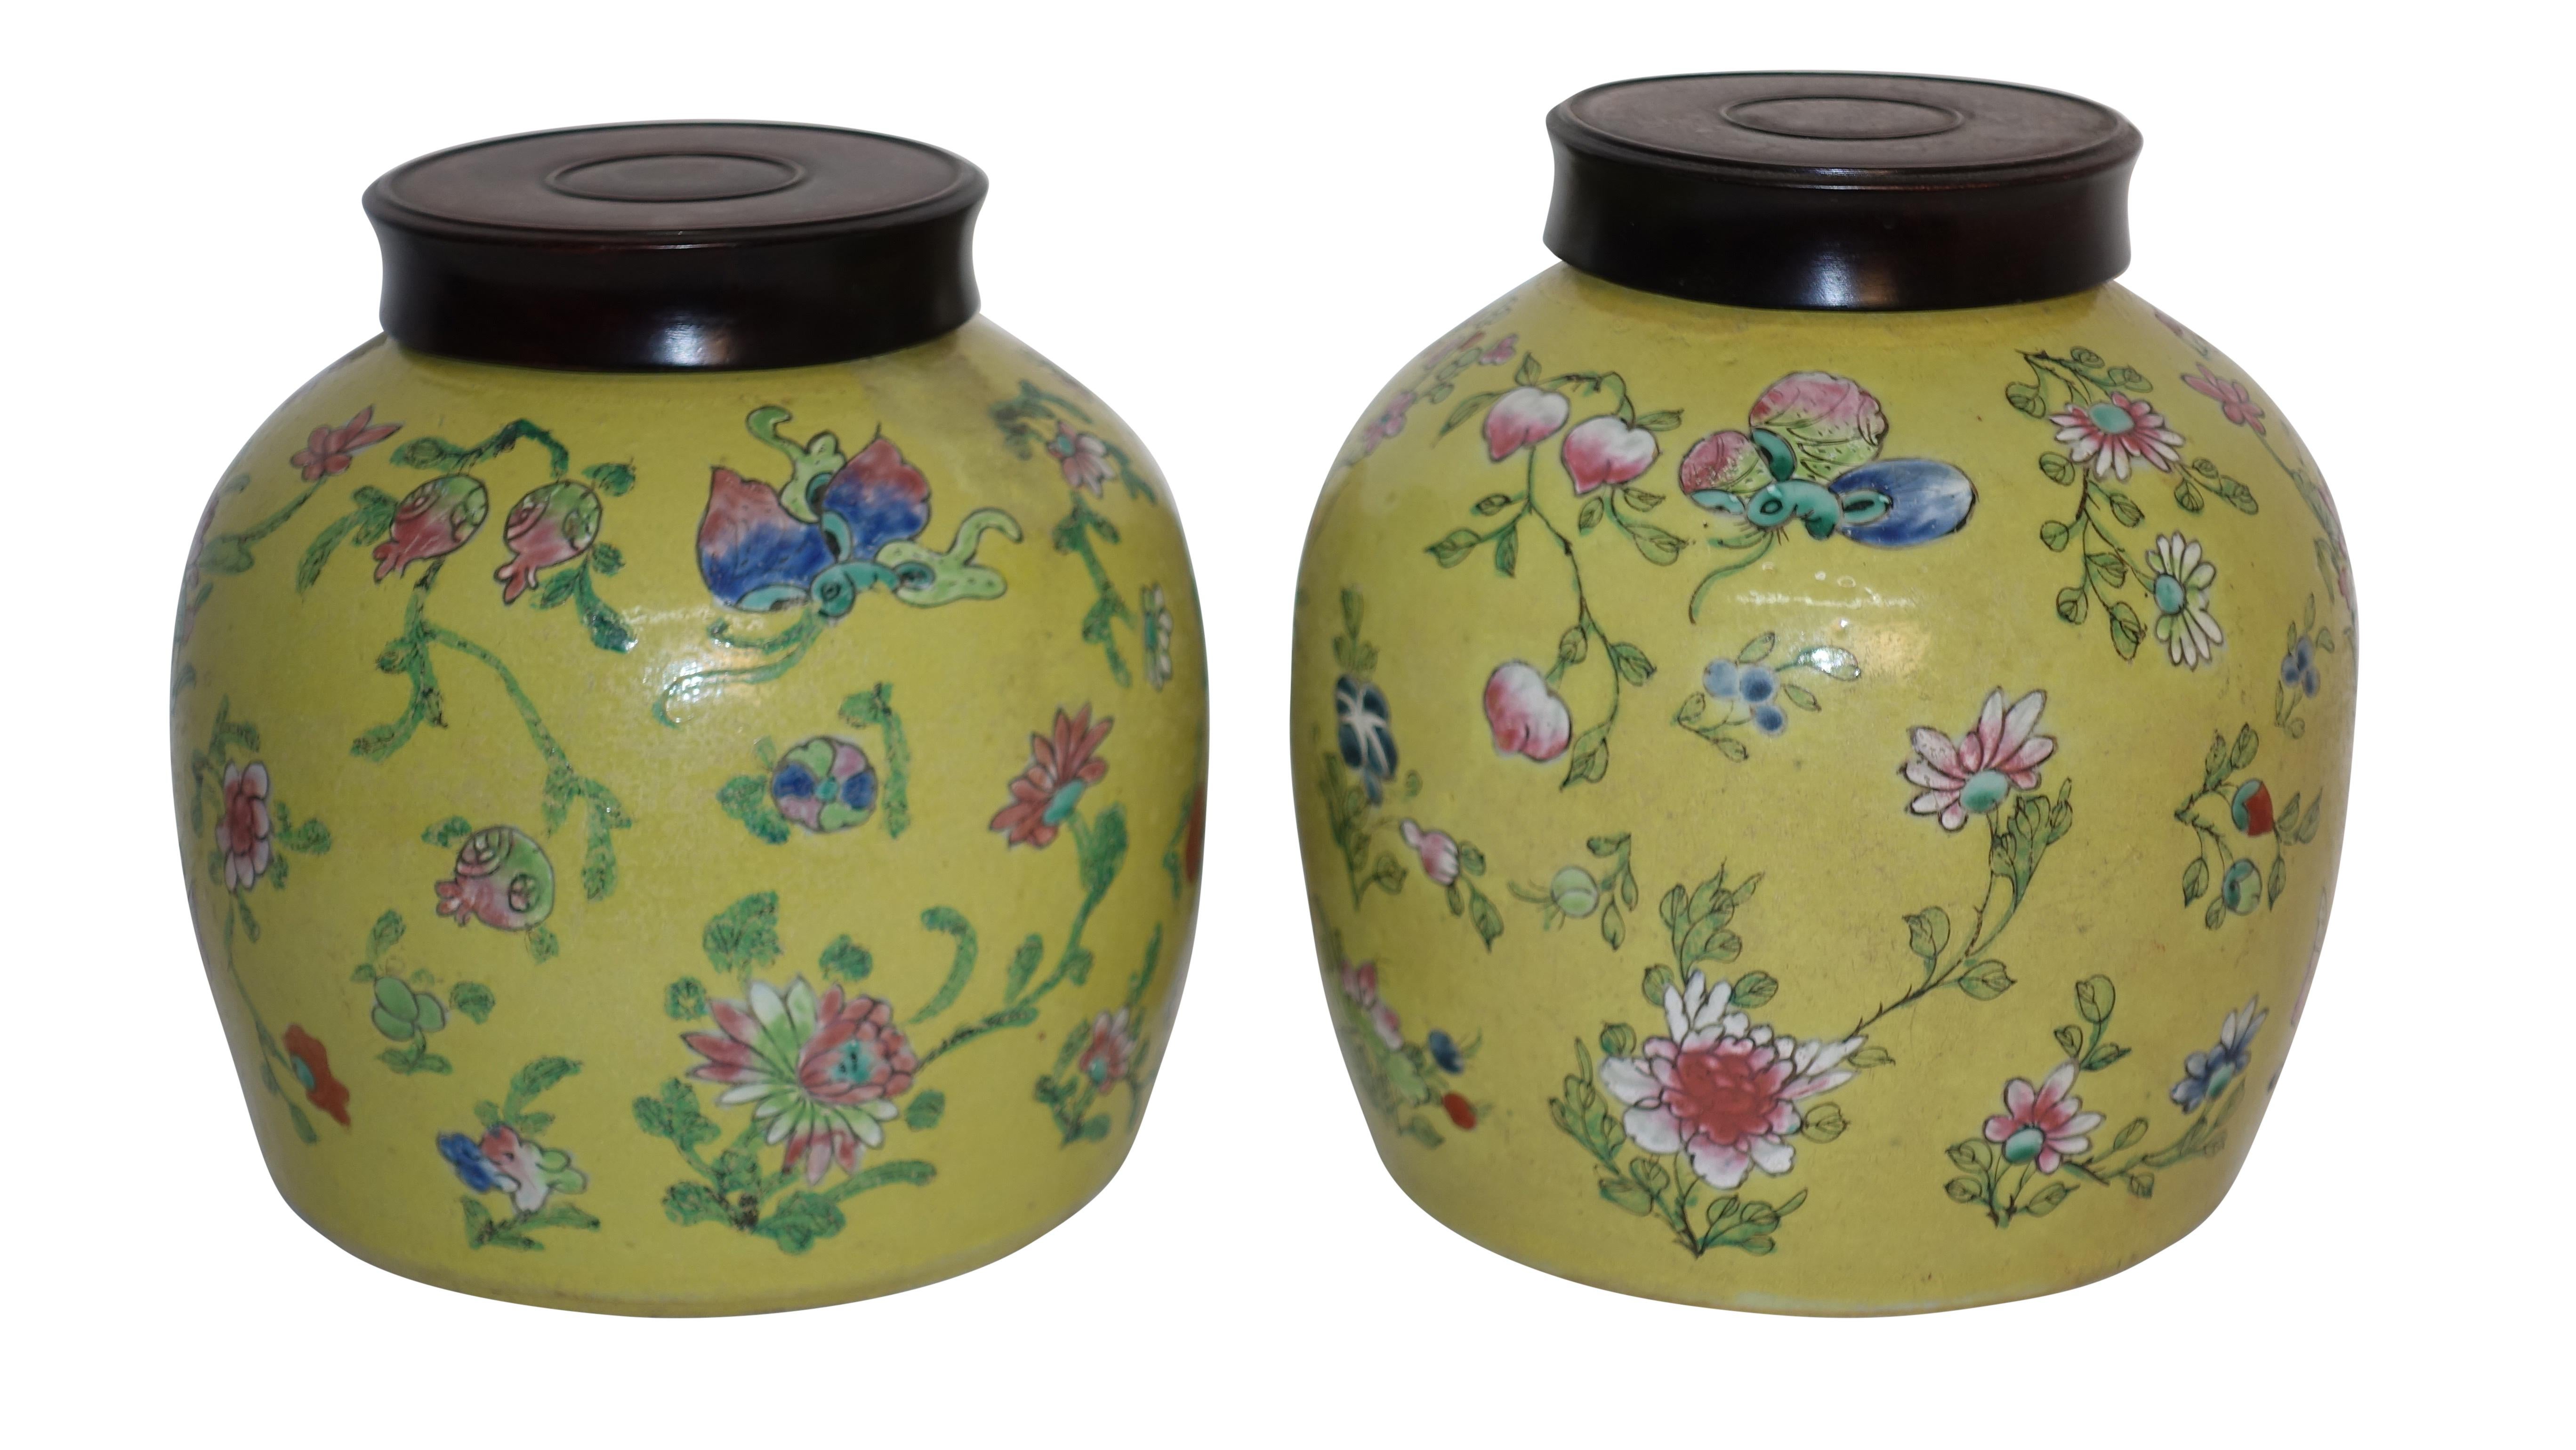 Hand-Painted Pair of Mustard Yellow Jars with Wooden Lids, Chinese, Early 20th Century